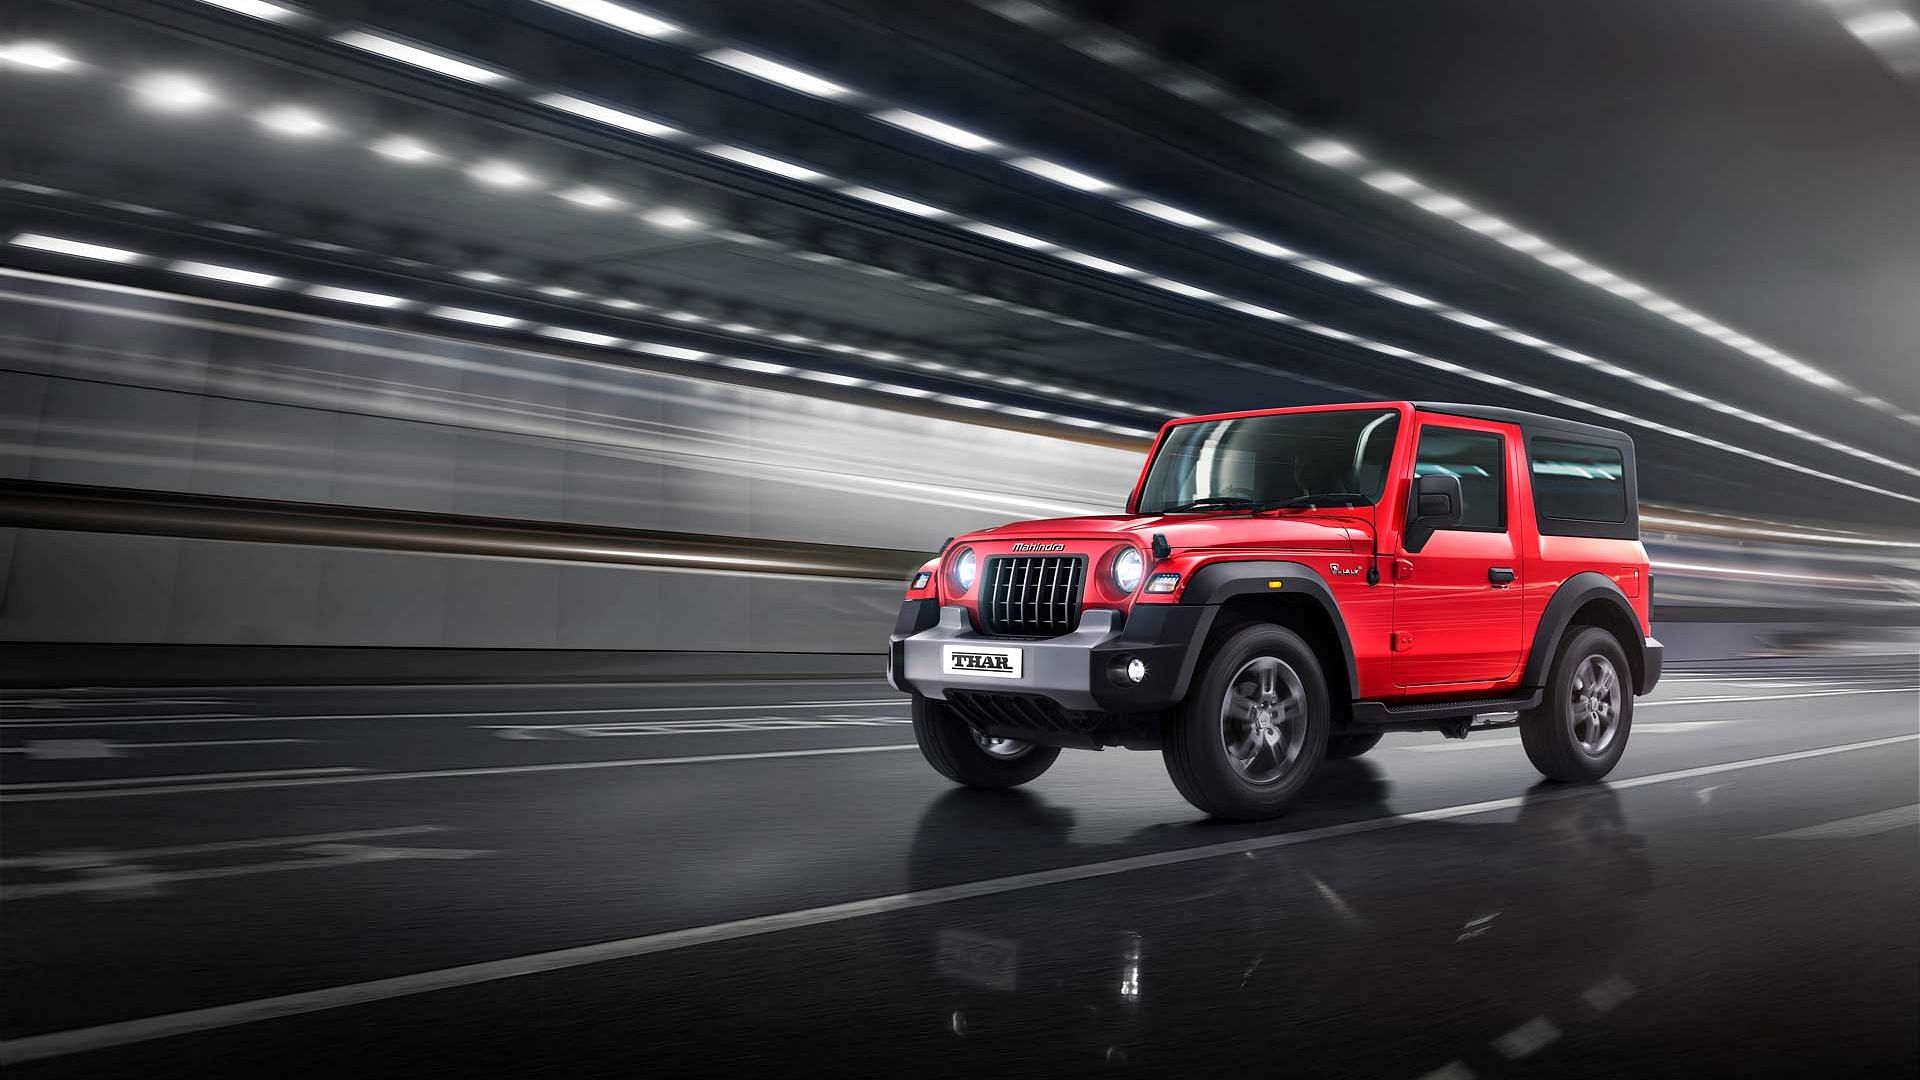 The new Mahindra Thar comes with new petrol and diesel engines.